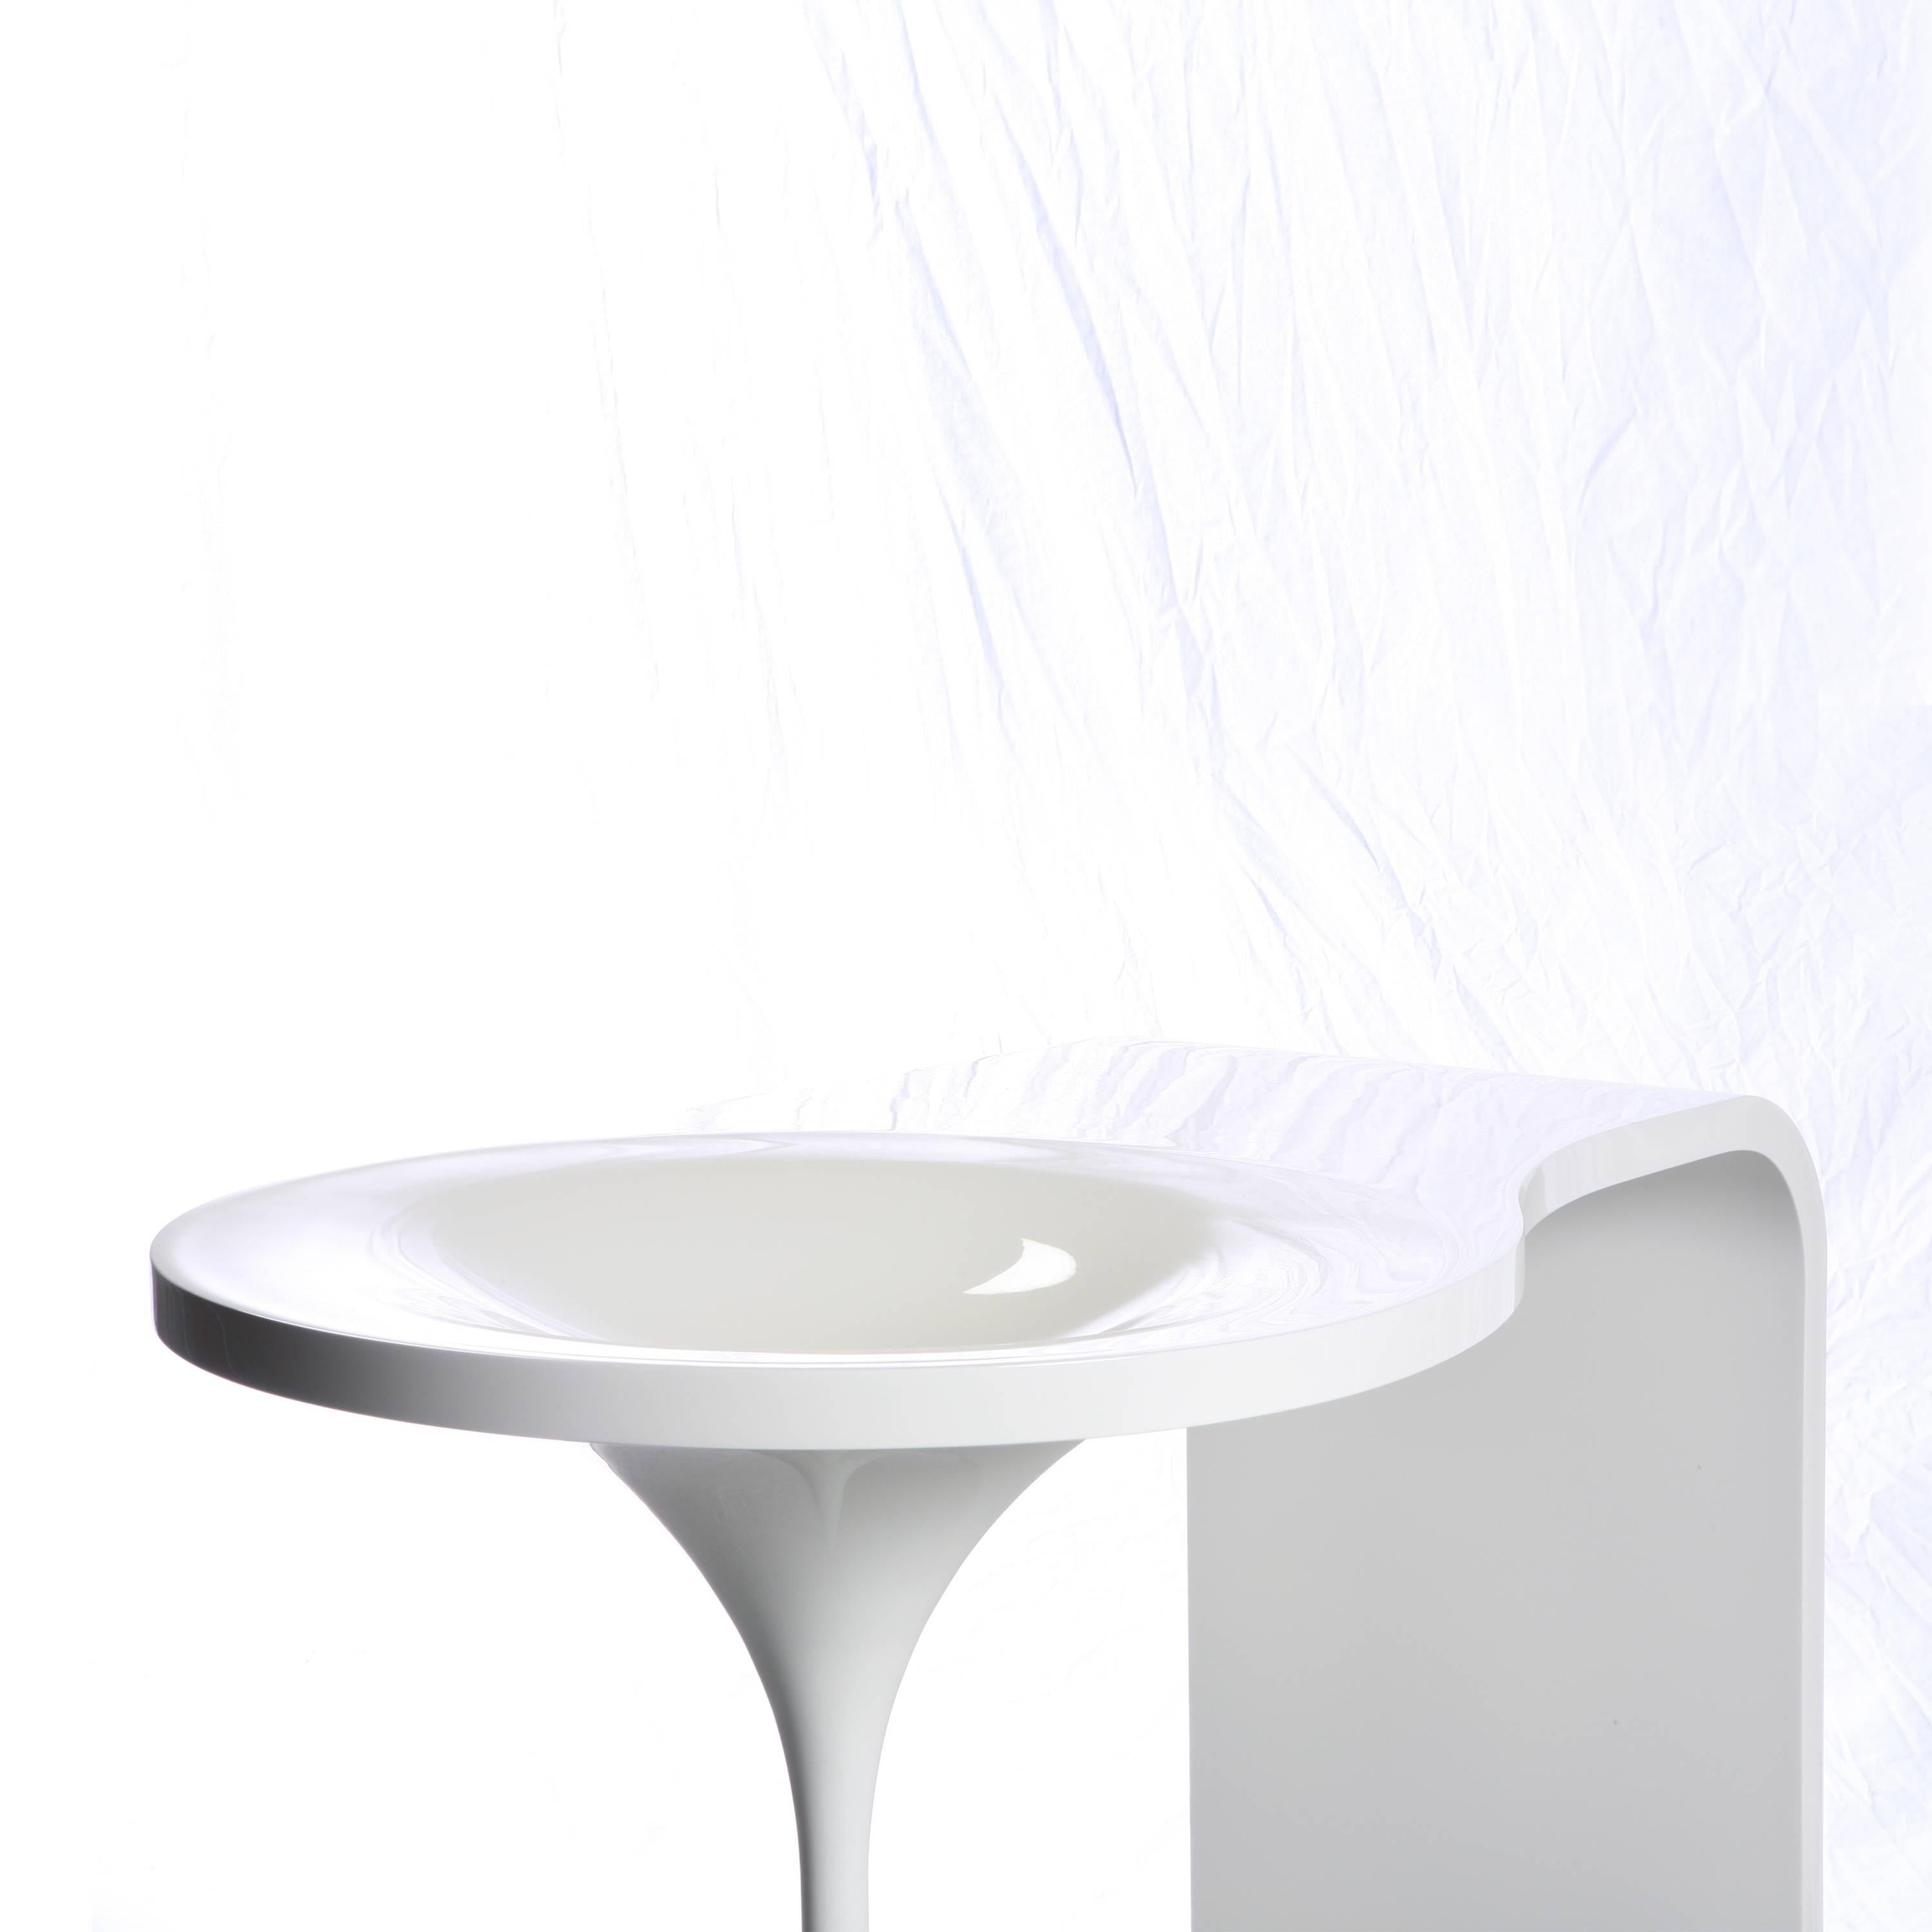 Inspired by melting snow and icicles, this small vanity table easily fits into the corner of most bedrooms. The shiny table surface incorporates a bowl for holding cosmetics. It can also function as an entry table holding water for flowers, keys, or